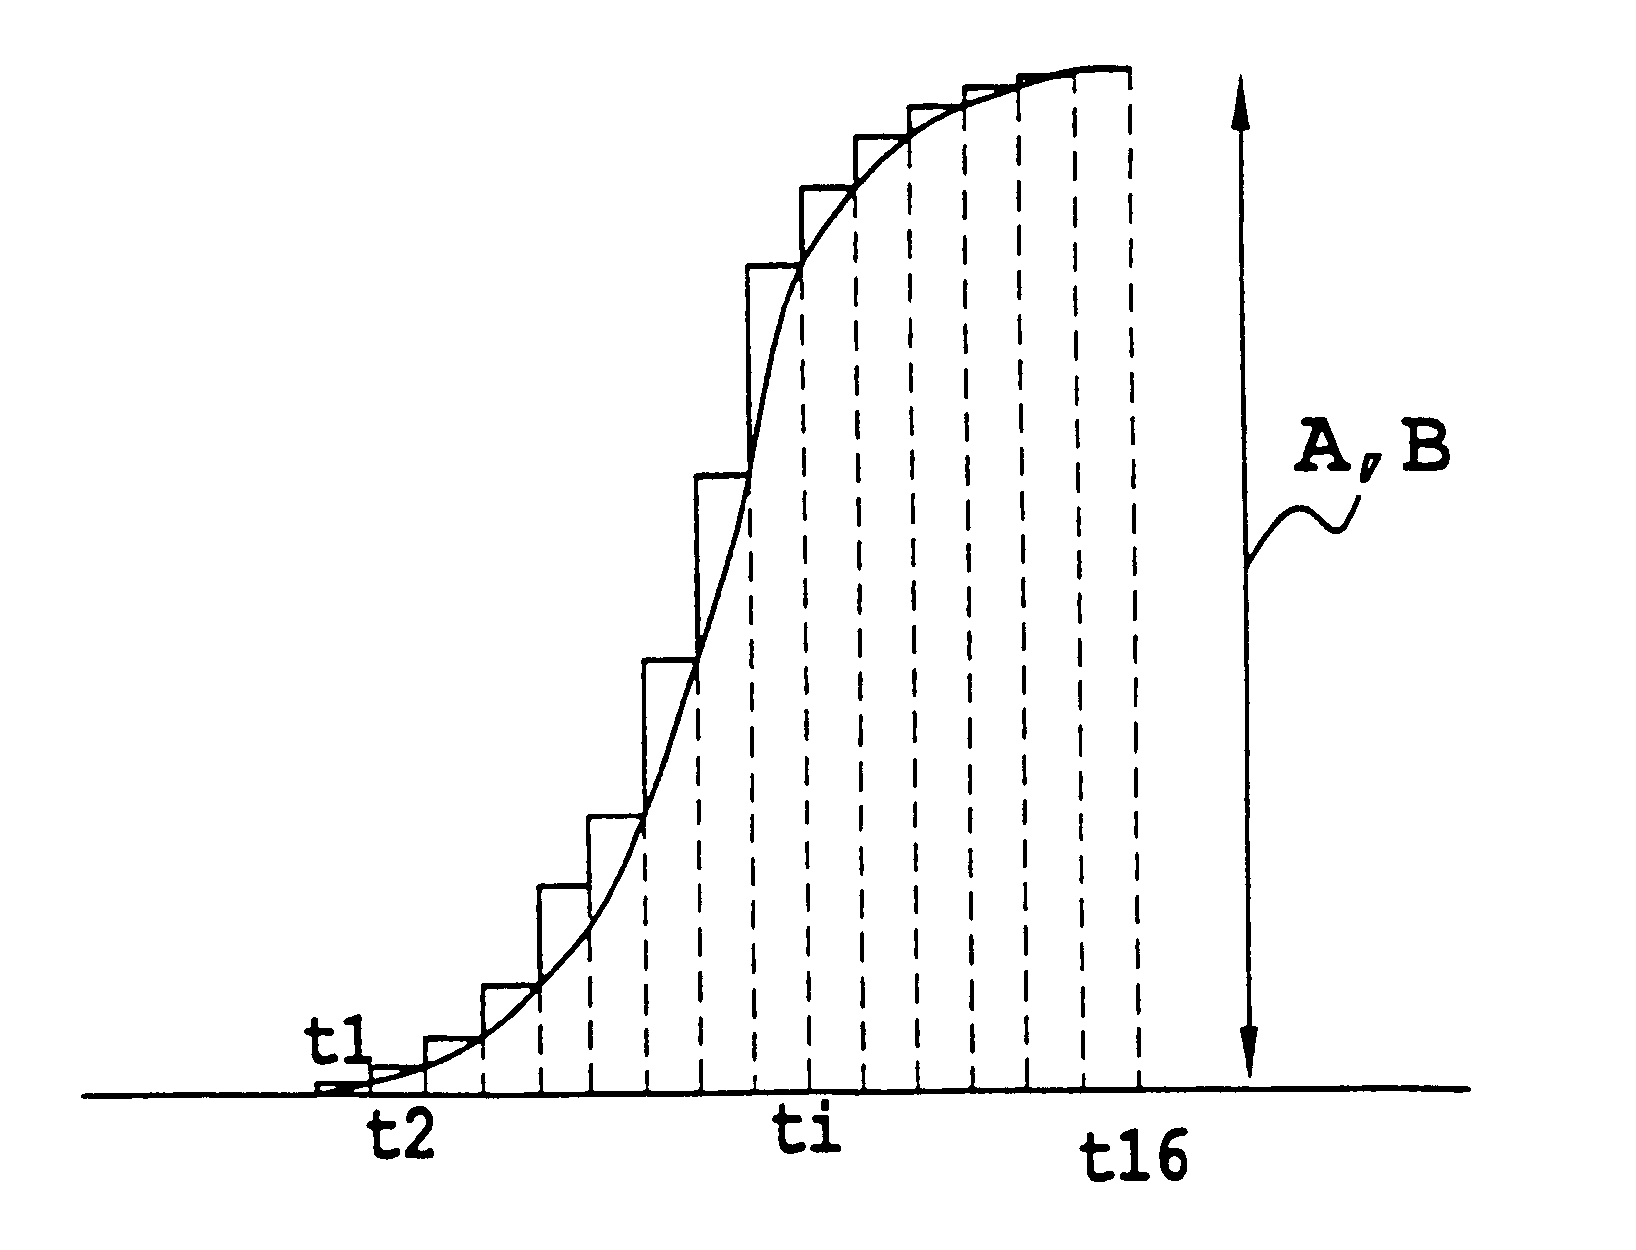 Method of transmitting in successive time slots